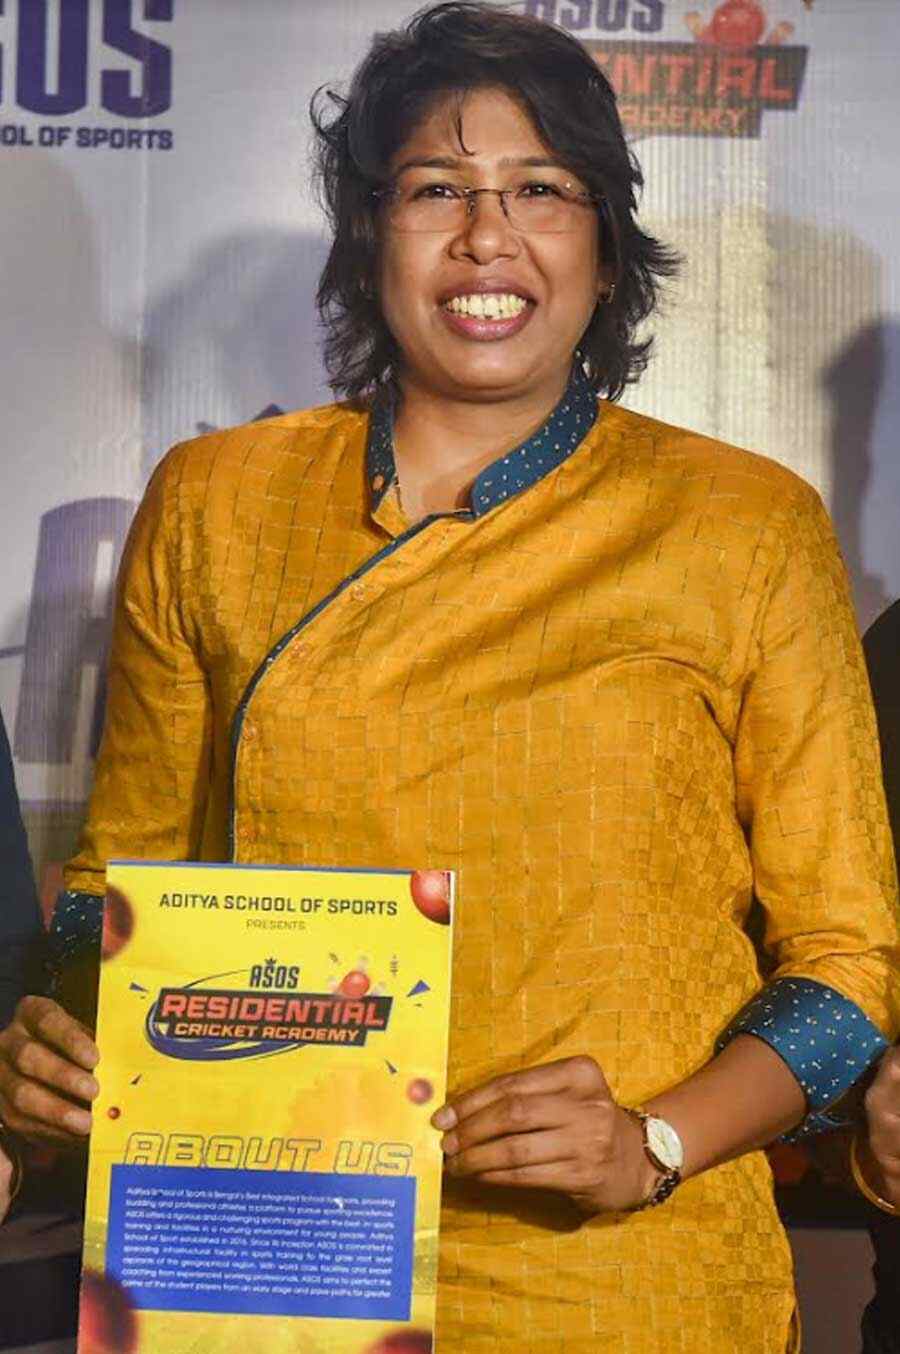 Former women's India cricket team captain Jhulan Goswami announces the opening of Aditya School of Sports Residential Cricket Academy in the city on Thursday 